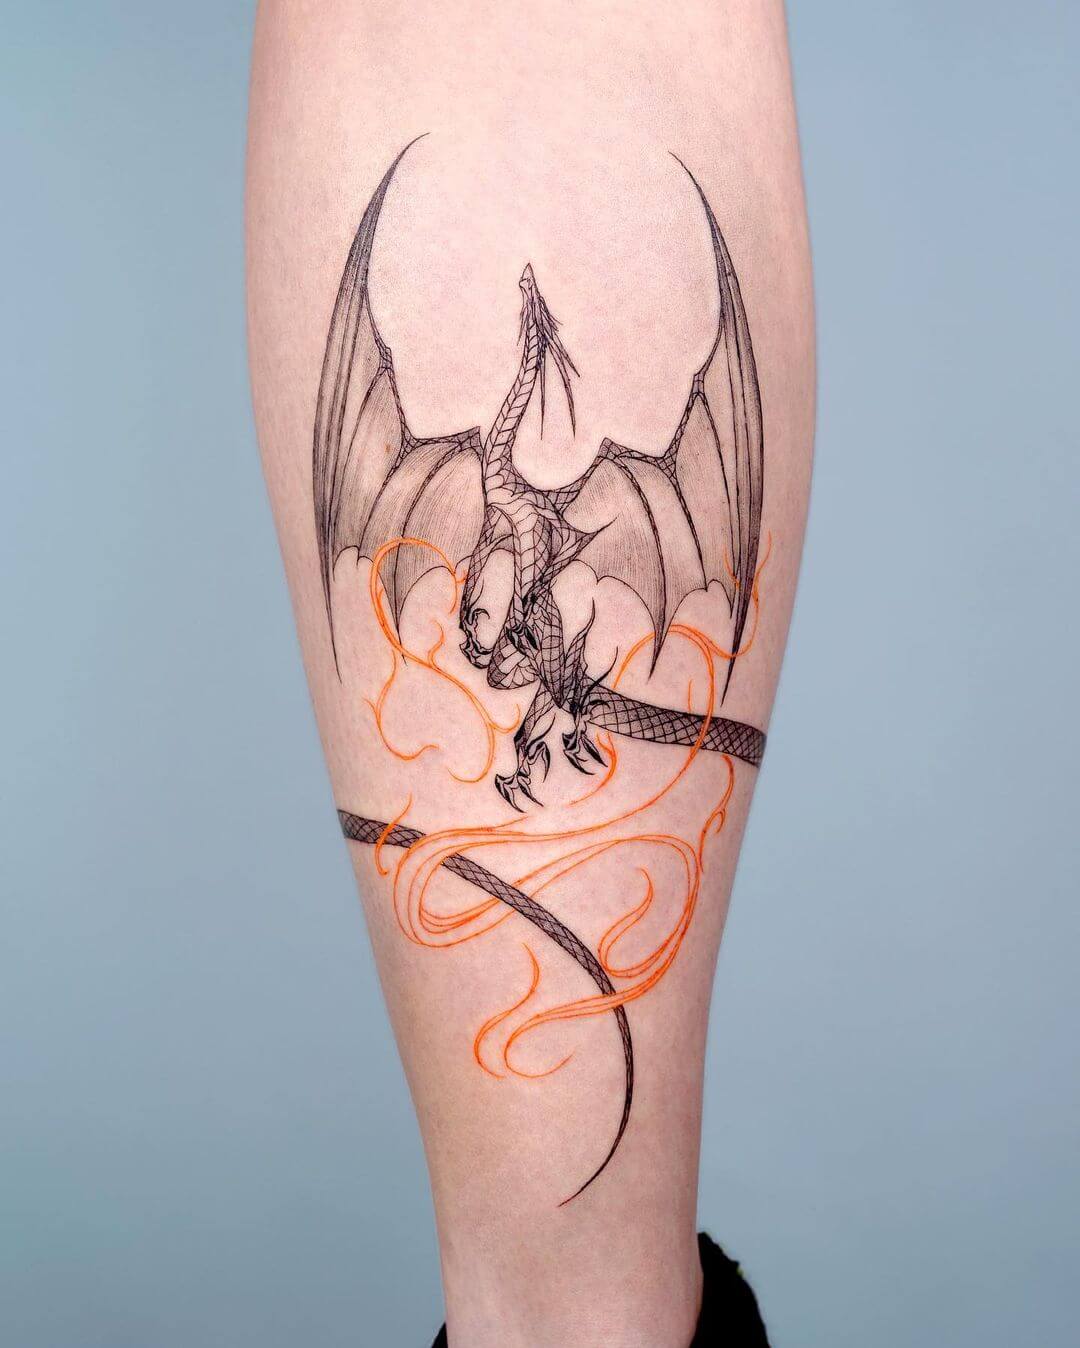 101 Best Fire Breathing Dragon Tattoo Ideas That Will Blow Your Mind!